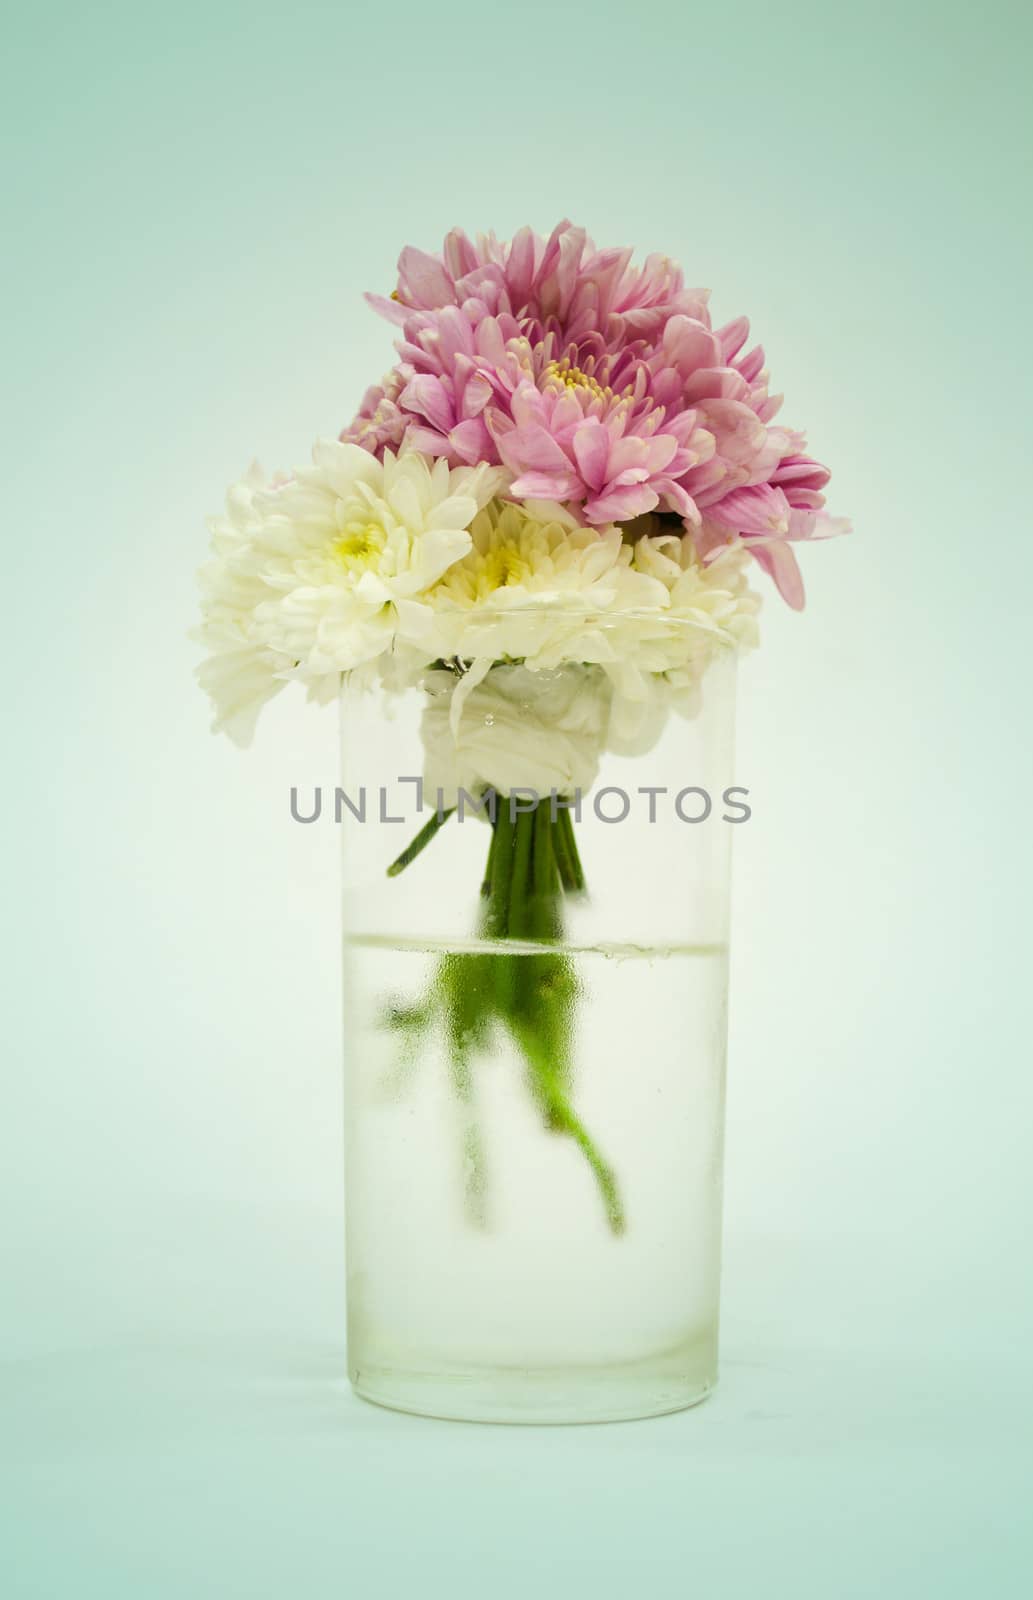 Flowers in a Vase by apichart